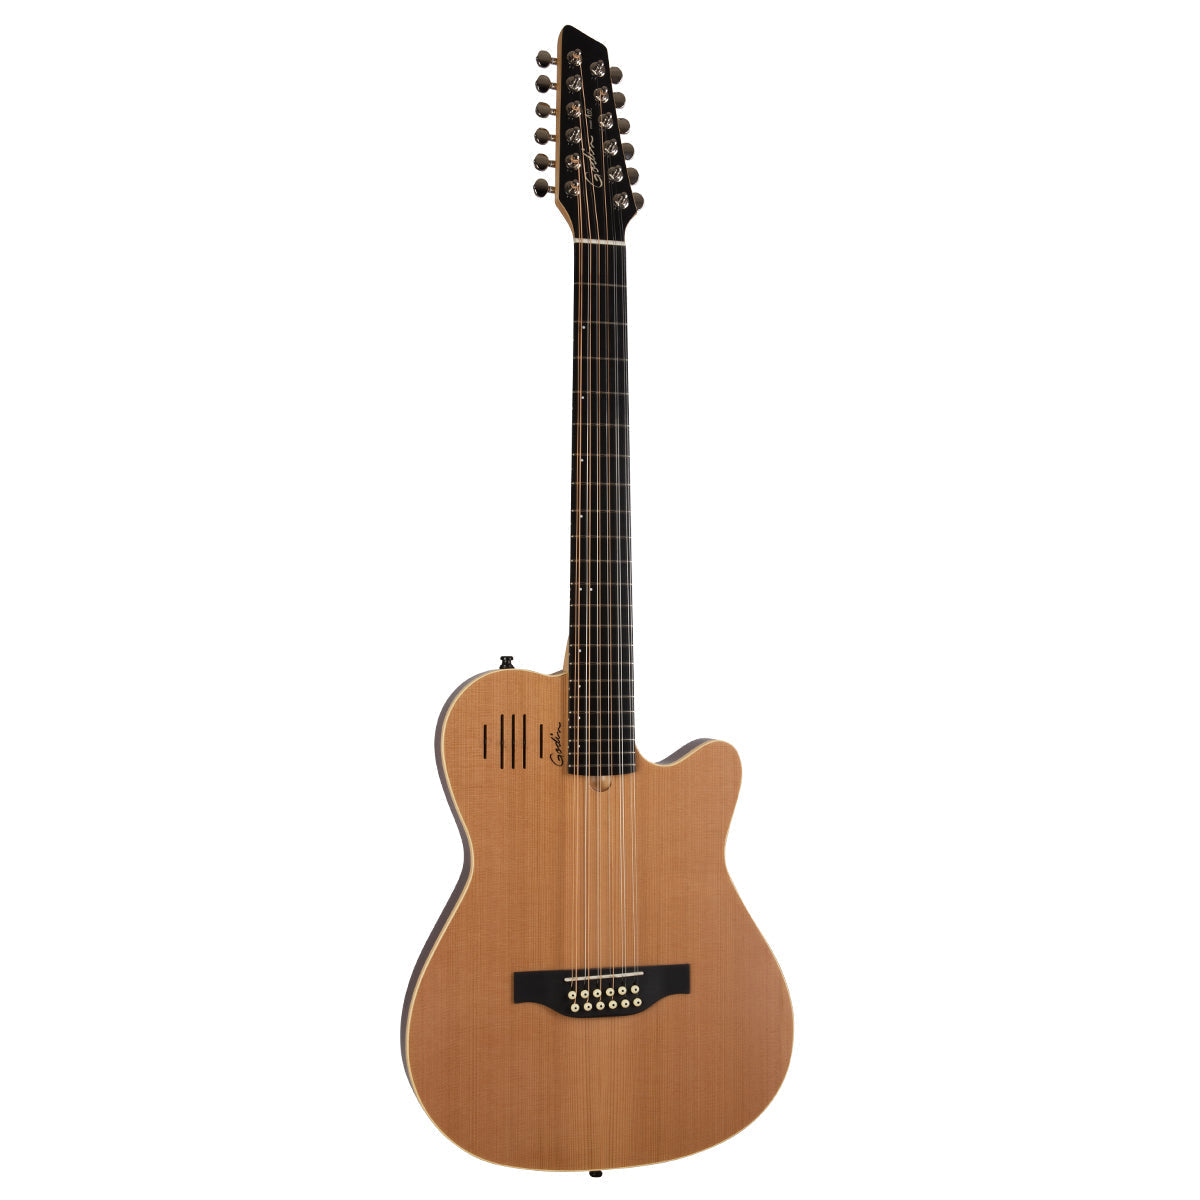 Godin A12 12 String Electric Guitar ~ Natural, Electric Guitar for sale at Richards Guitars.